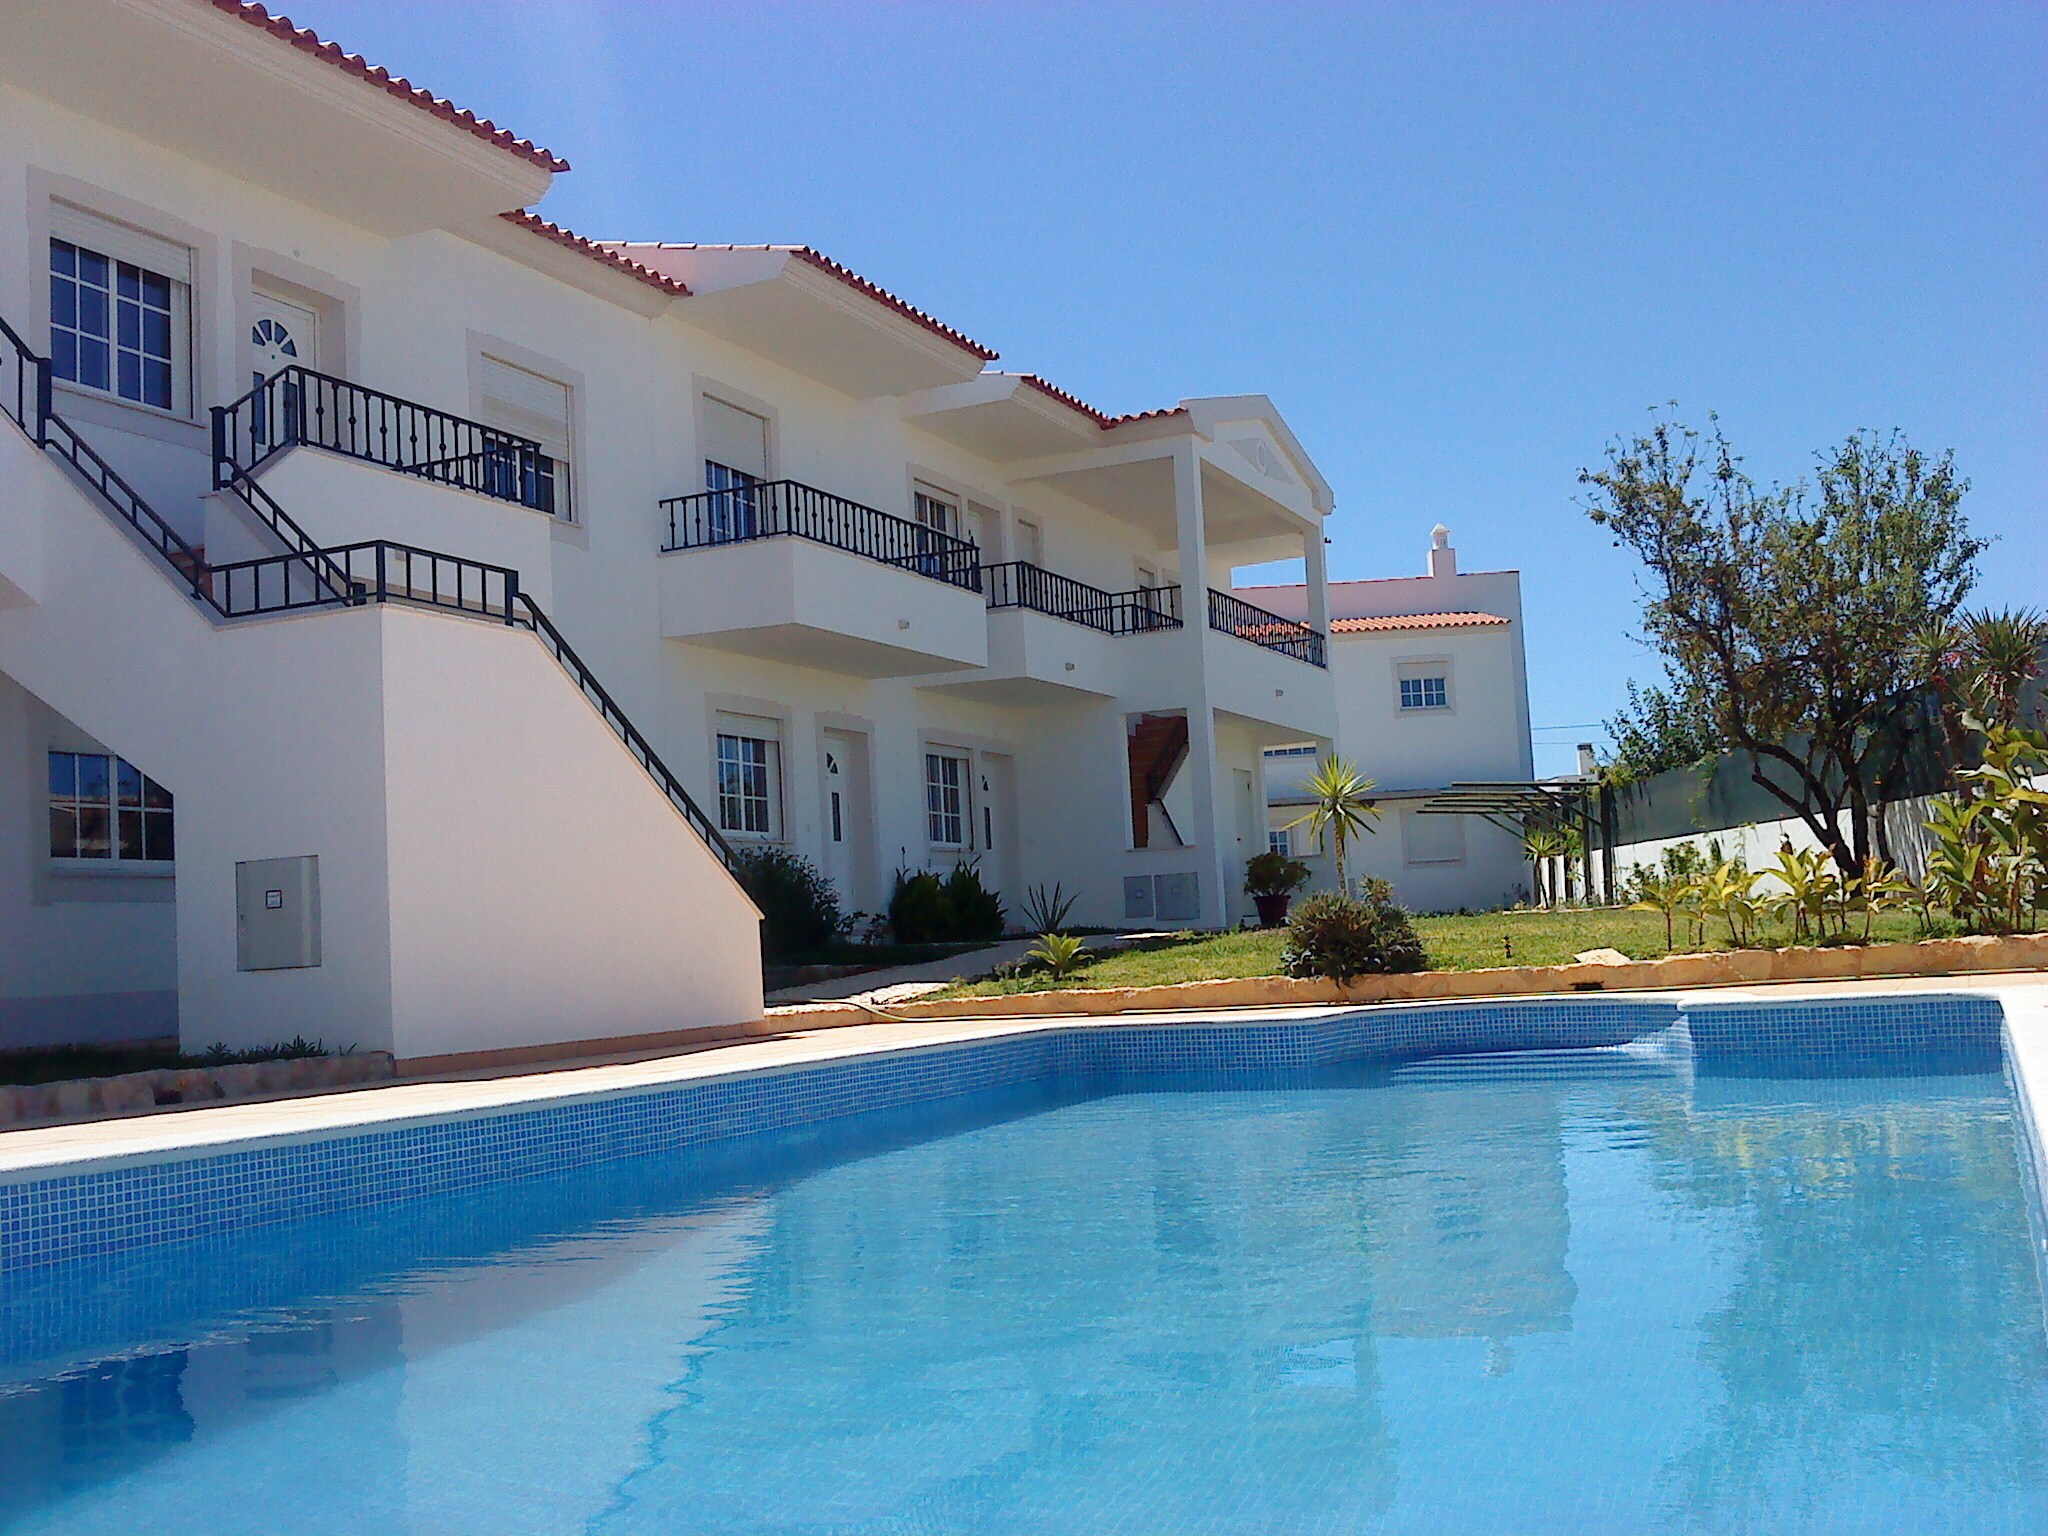 Property Image 2 - Albufeira 1 bedroom apartment 5 min. from Falesia beach and close to center! J